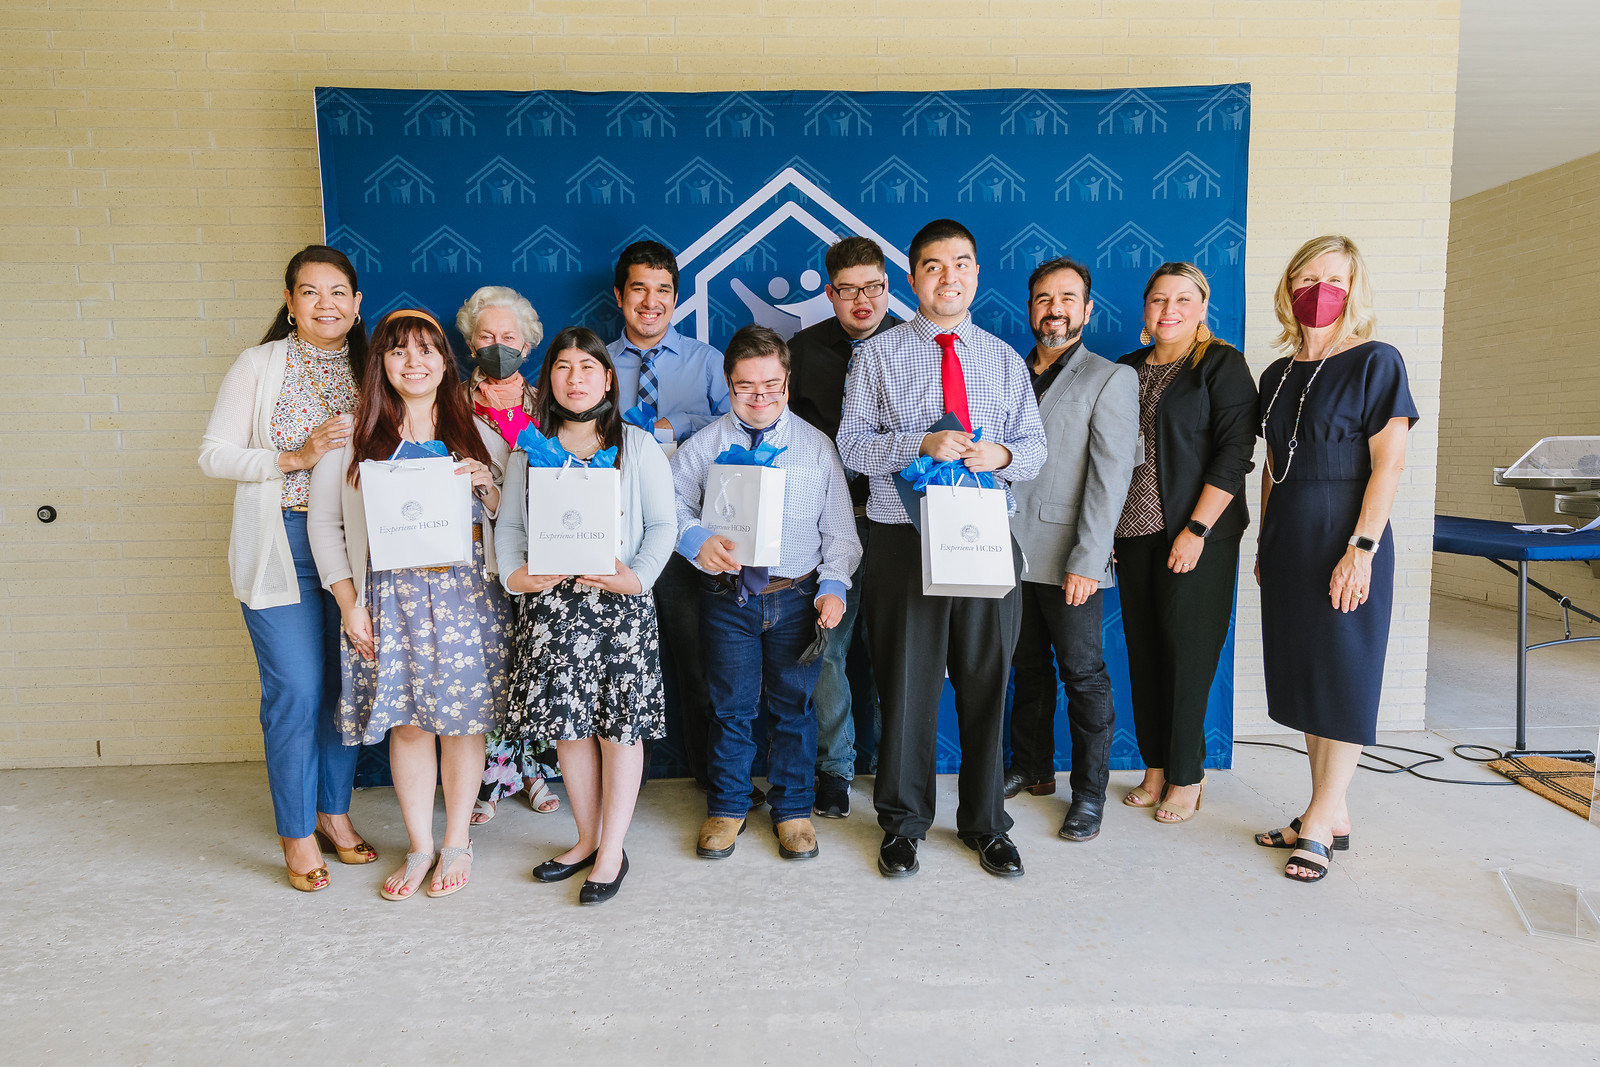 Transition Academy hosts first awards recognition ceremony